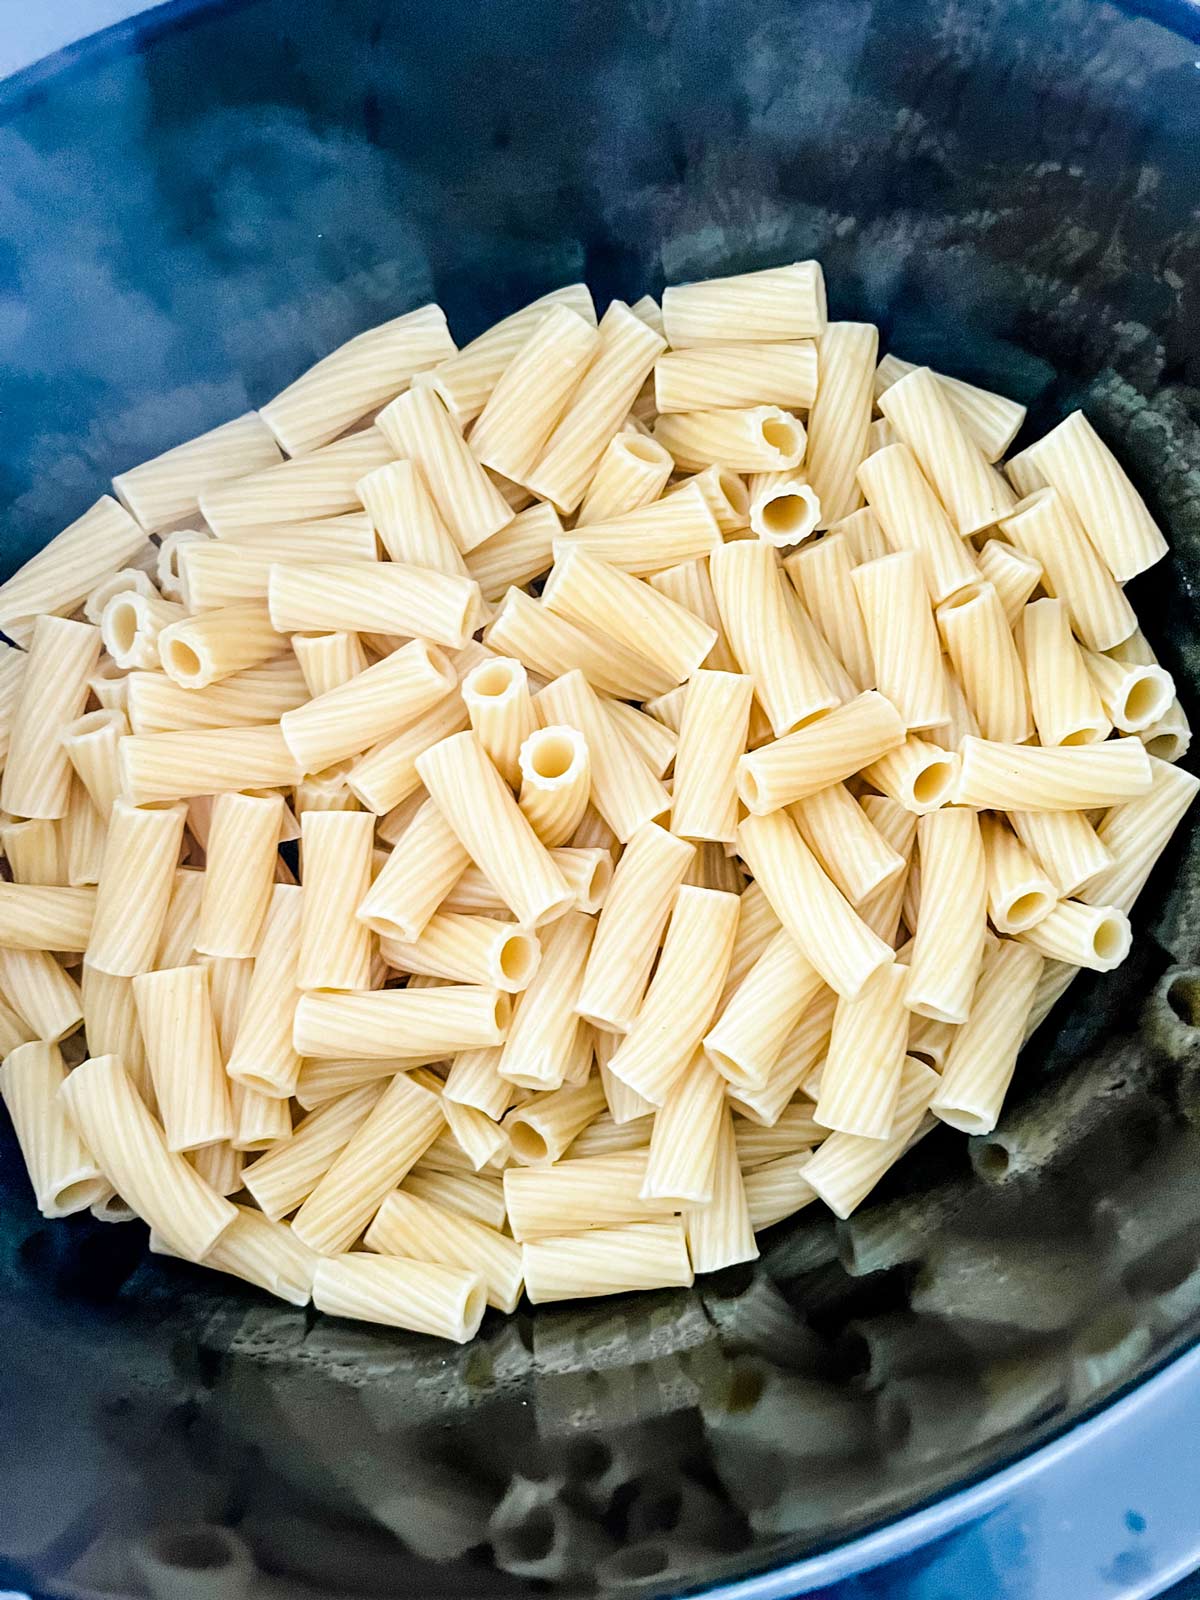 Partially cooked pasta in a slow cooker.